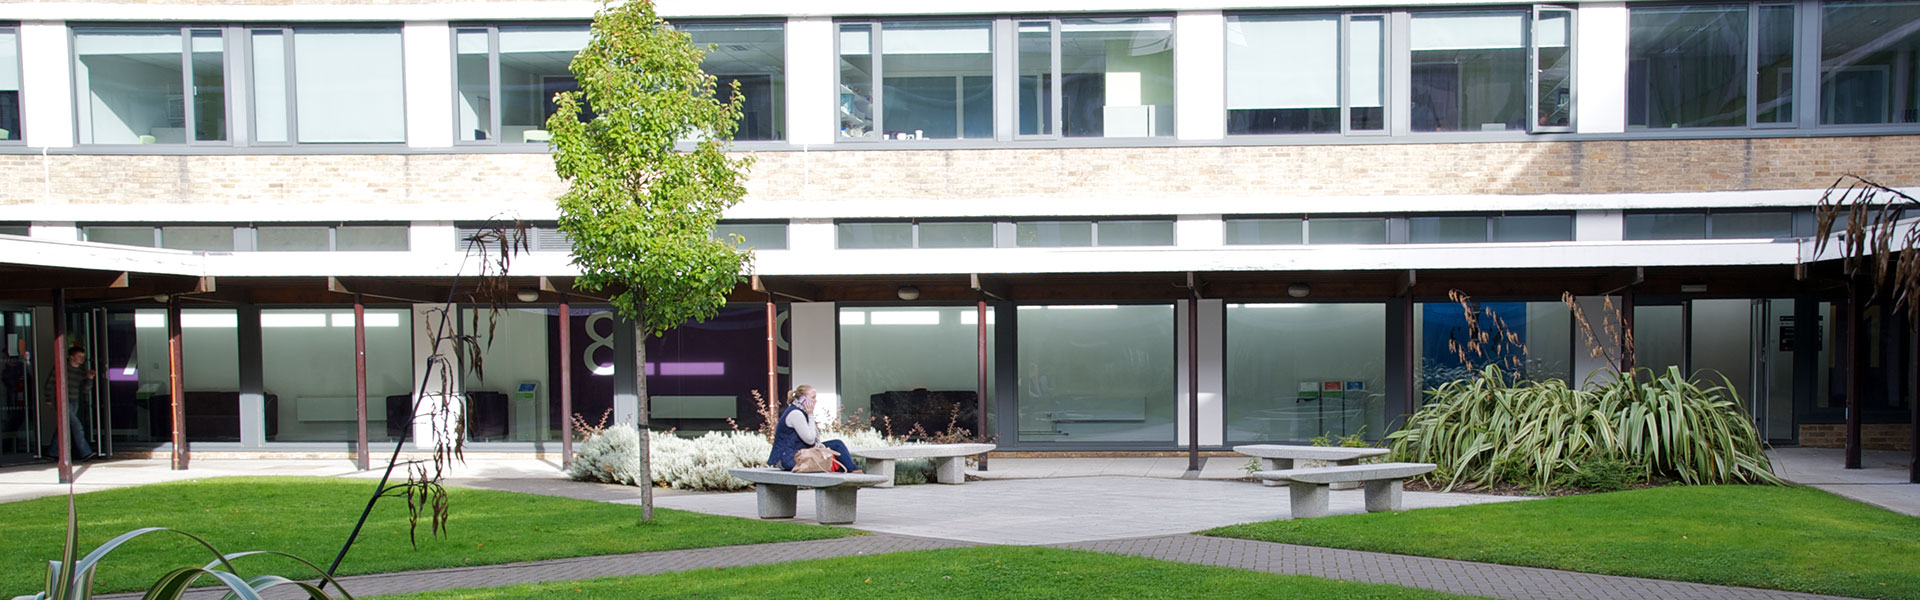 A lady sitting on a bench, taking a call. There are green shrubs and offices in the background.